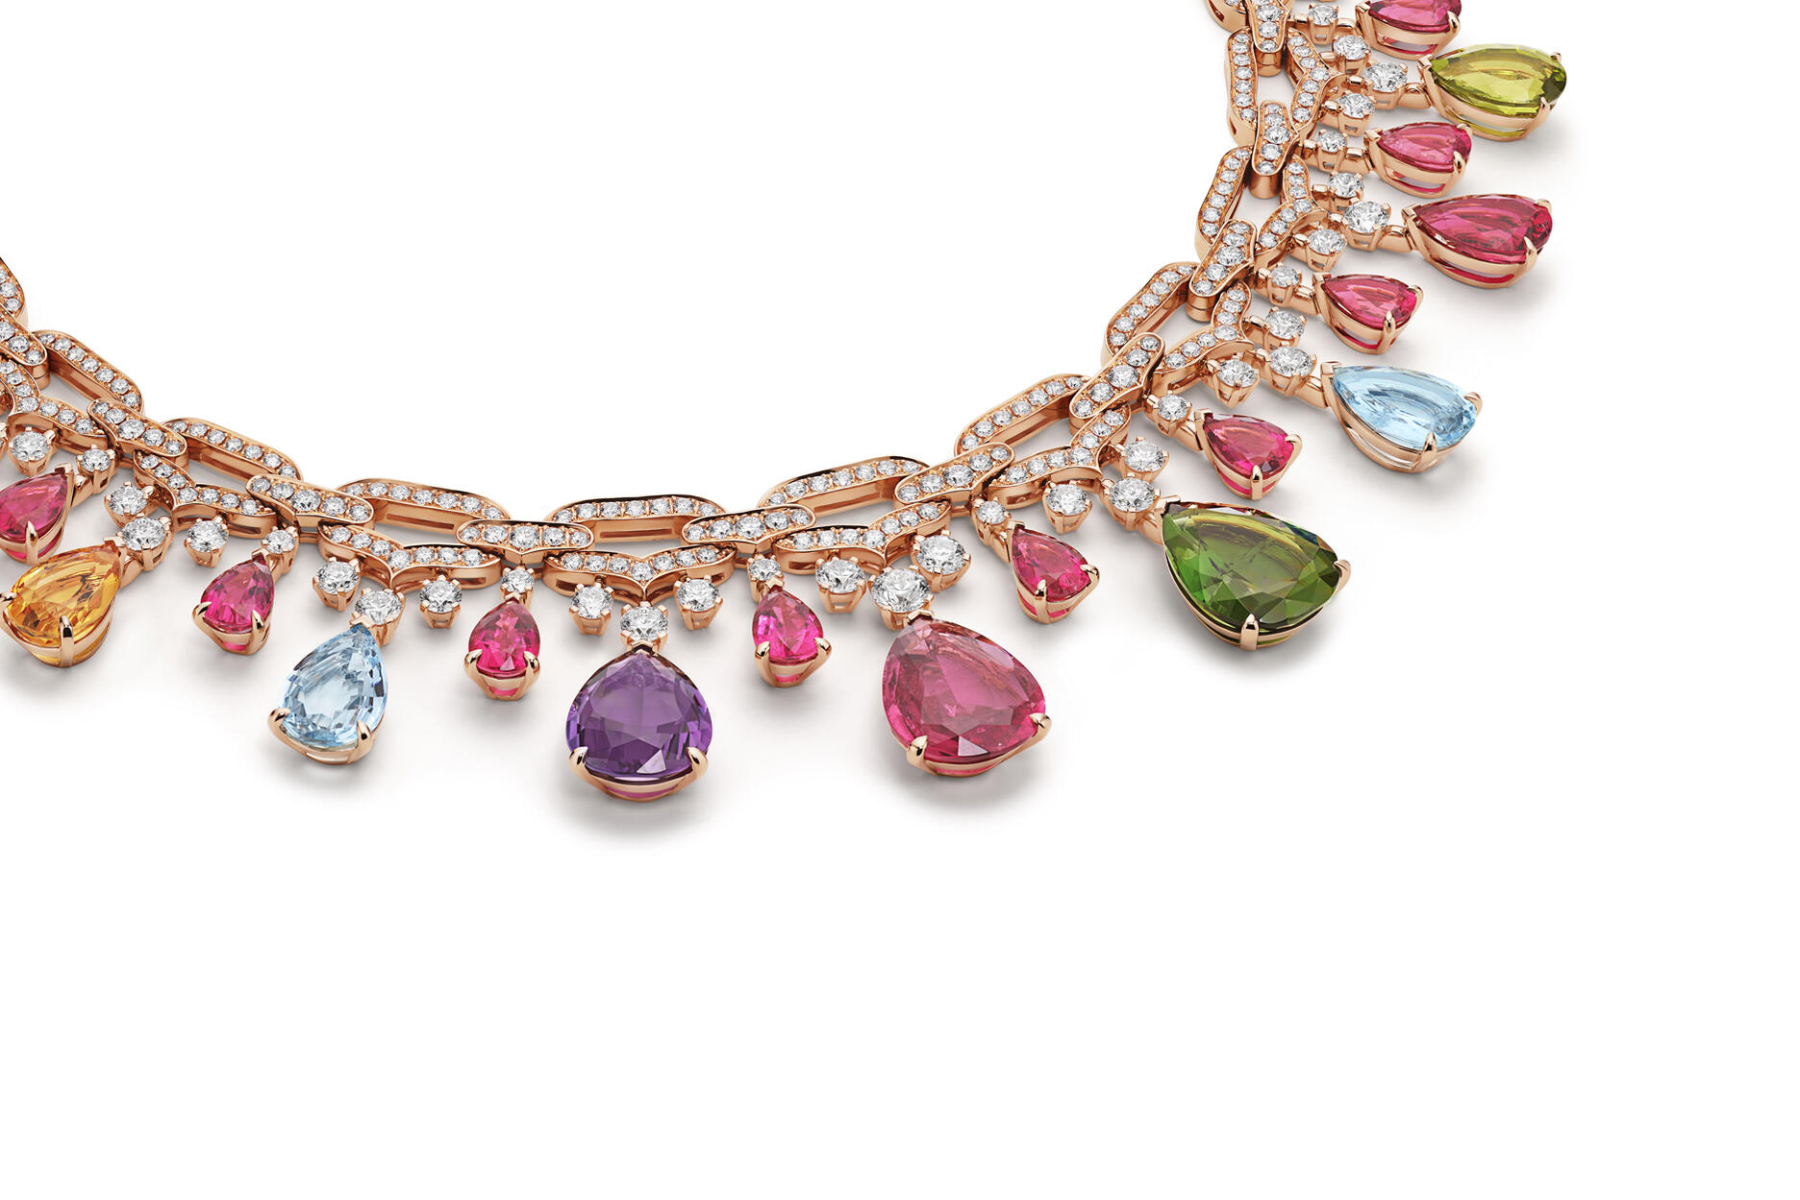 Piece Of The Week: The Bulgari Necklace In Taylor Swift’s ‘Bejeweled’